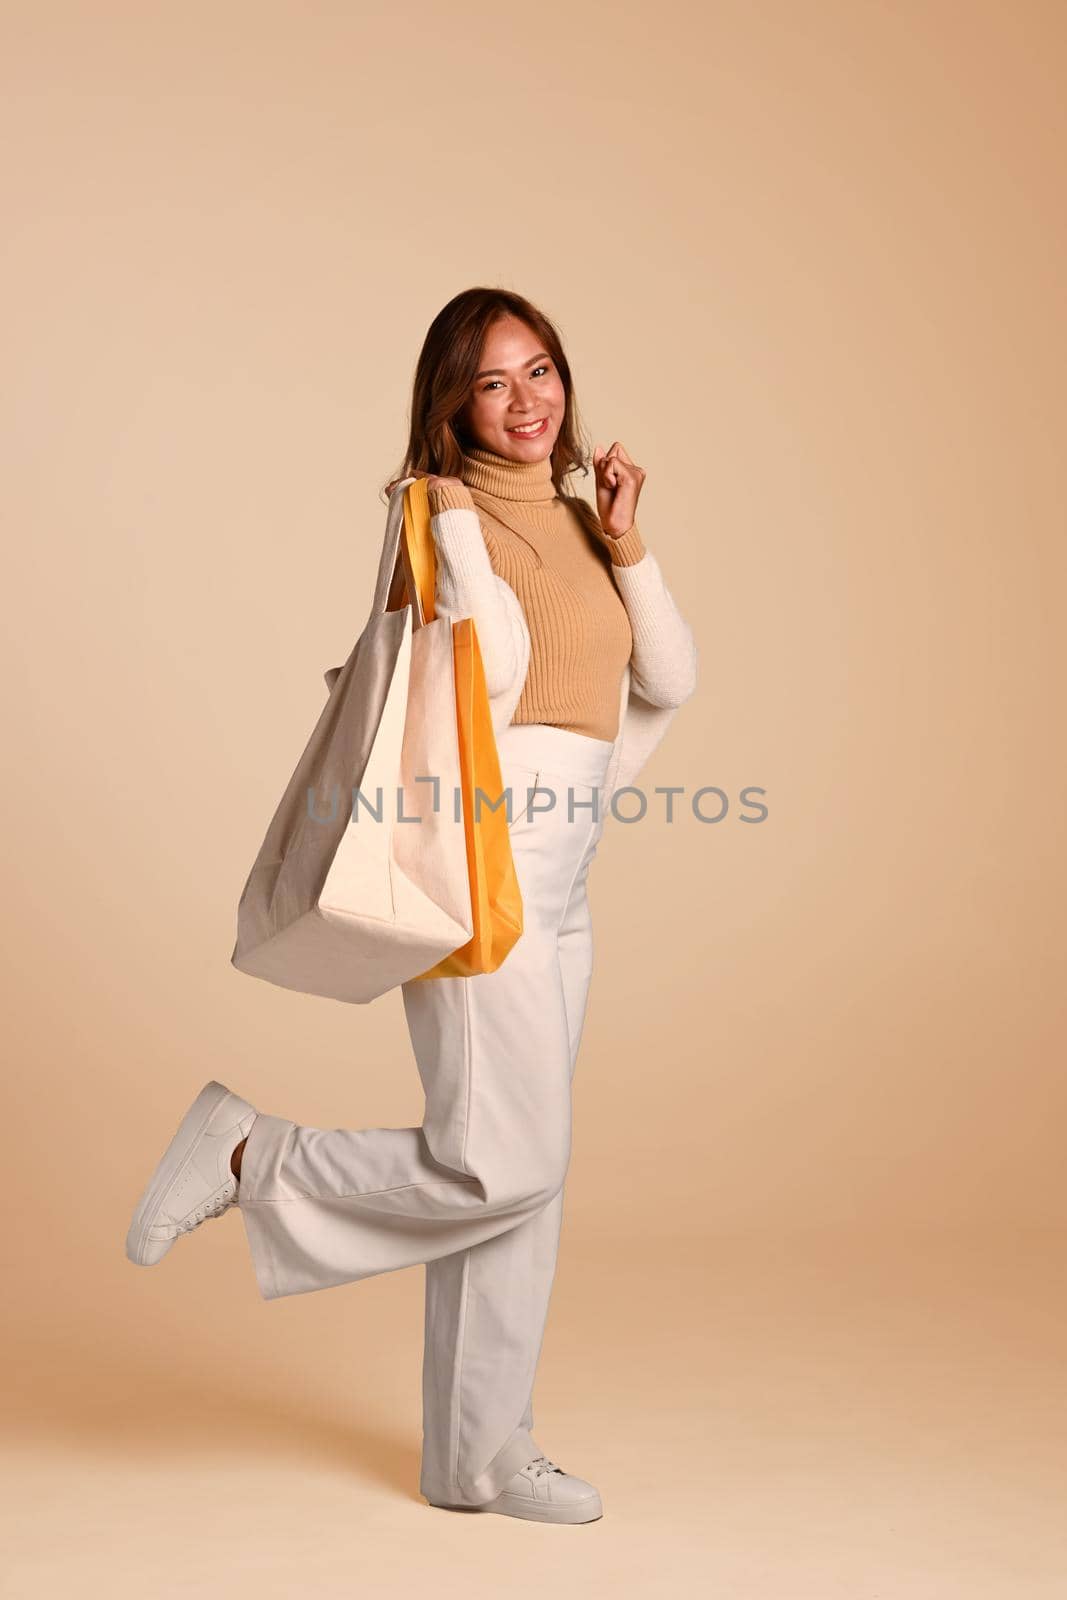 Full length of beautiful woman in warm sweater holding shopping bags standing on beige background. Black Friday concept.